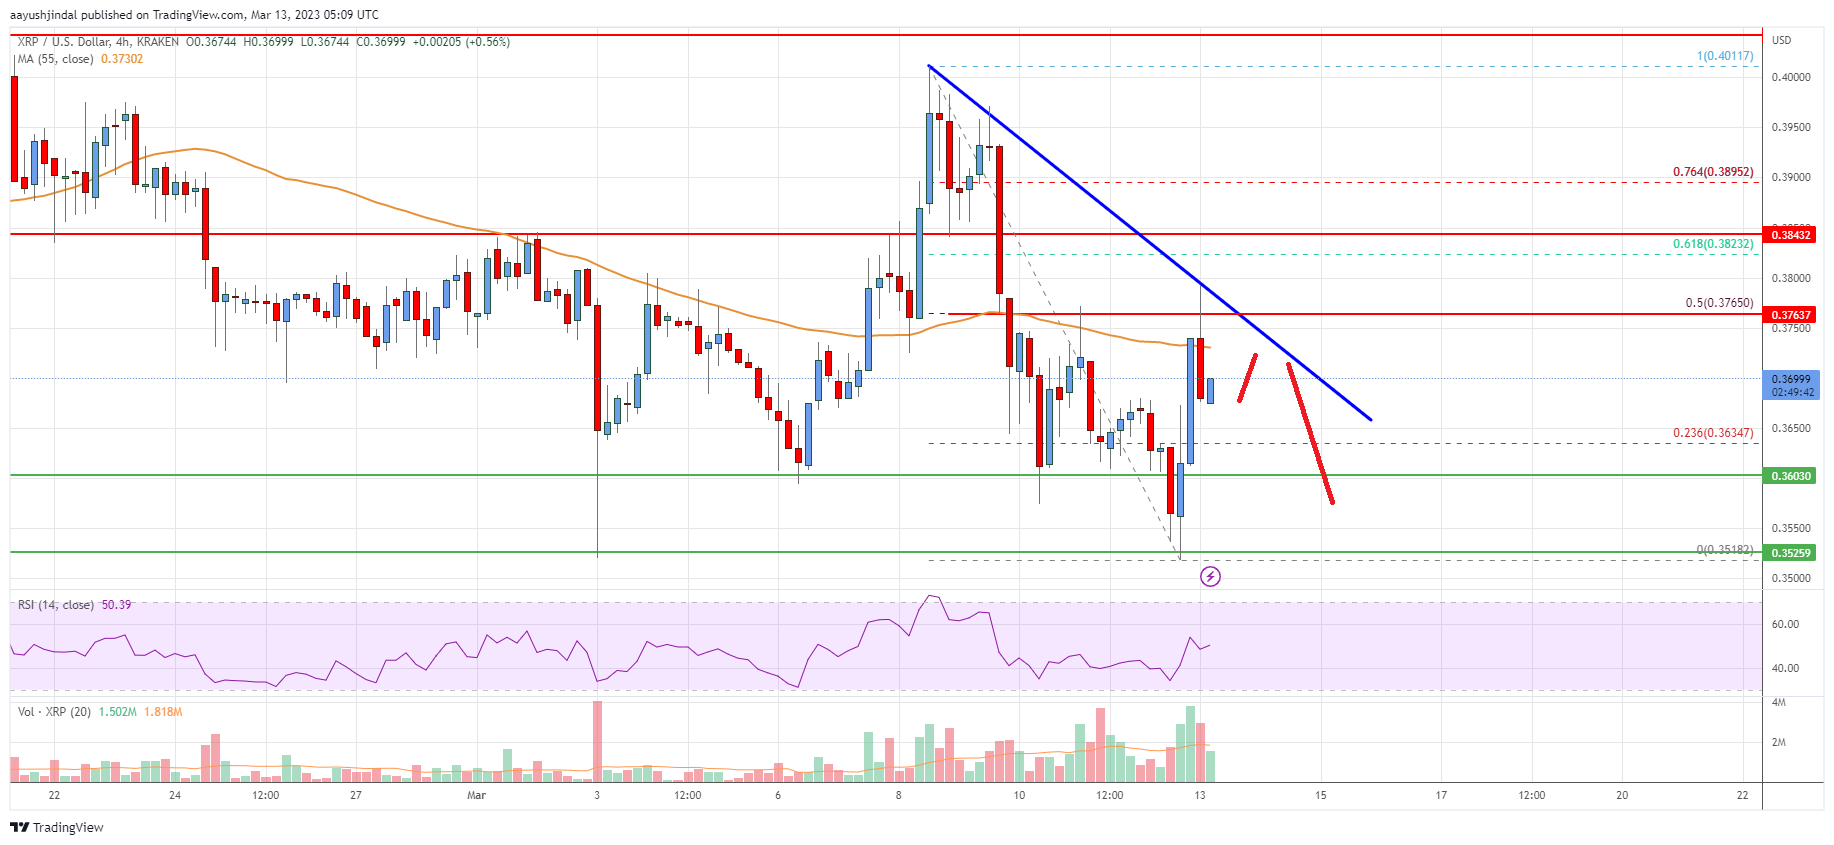 Ripple Price Analysis: Upsides Remain Capped Near $0.38